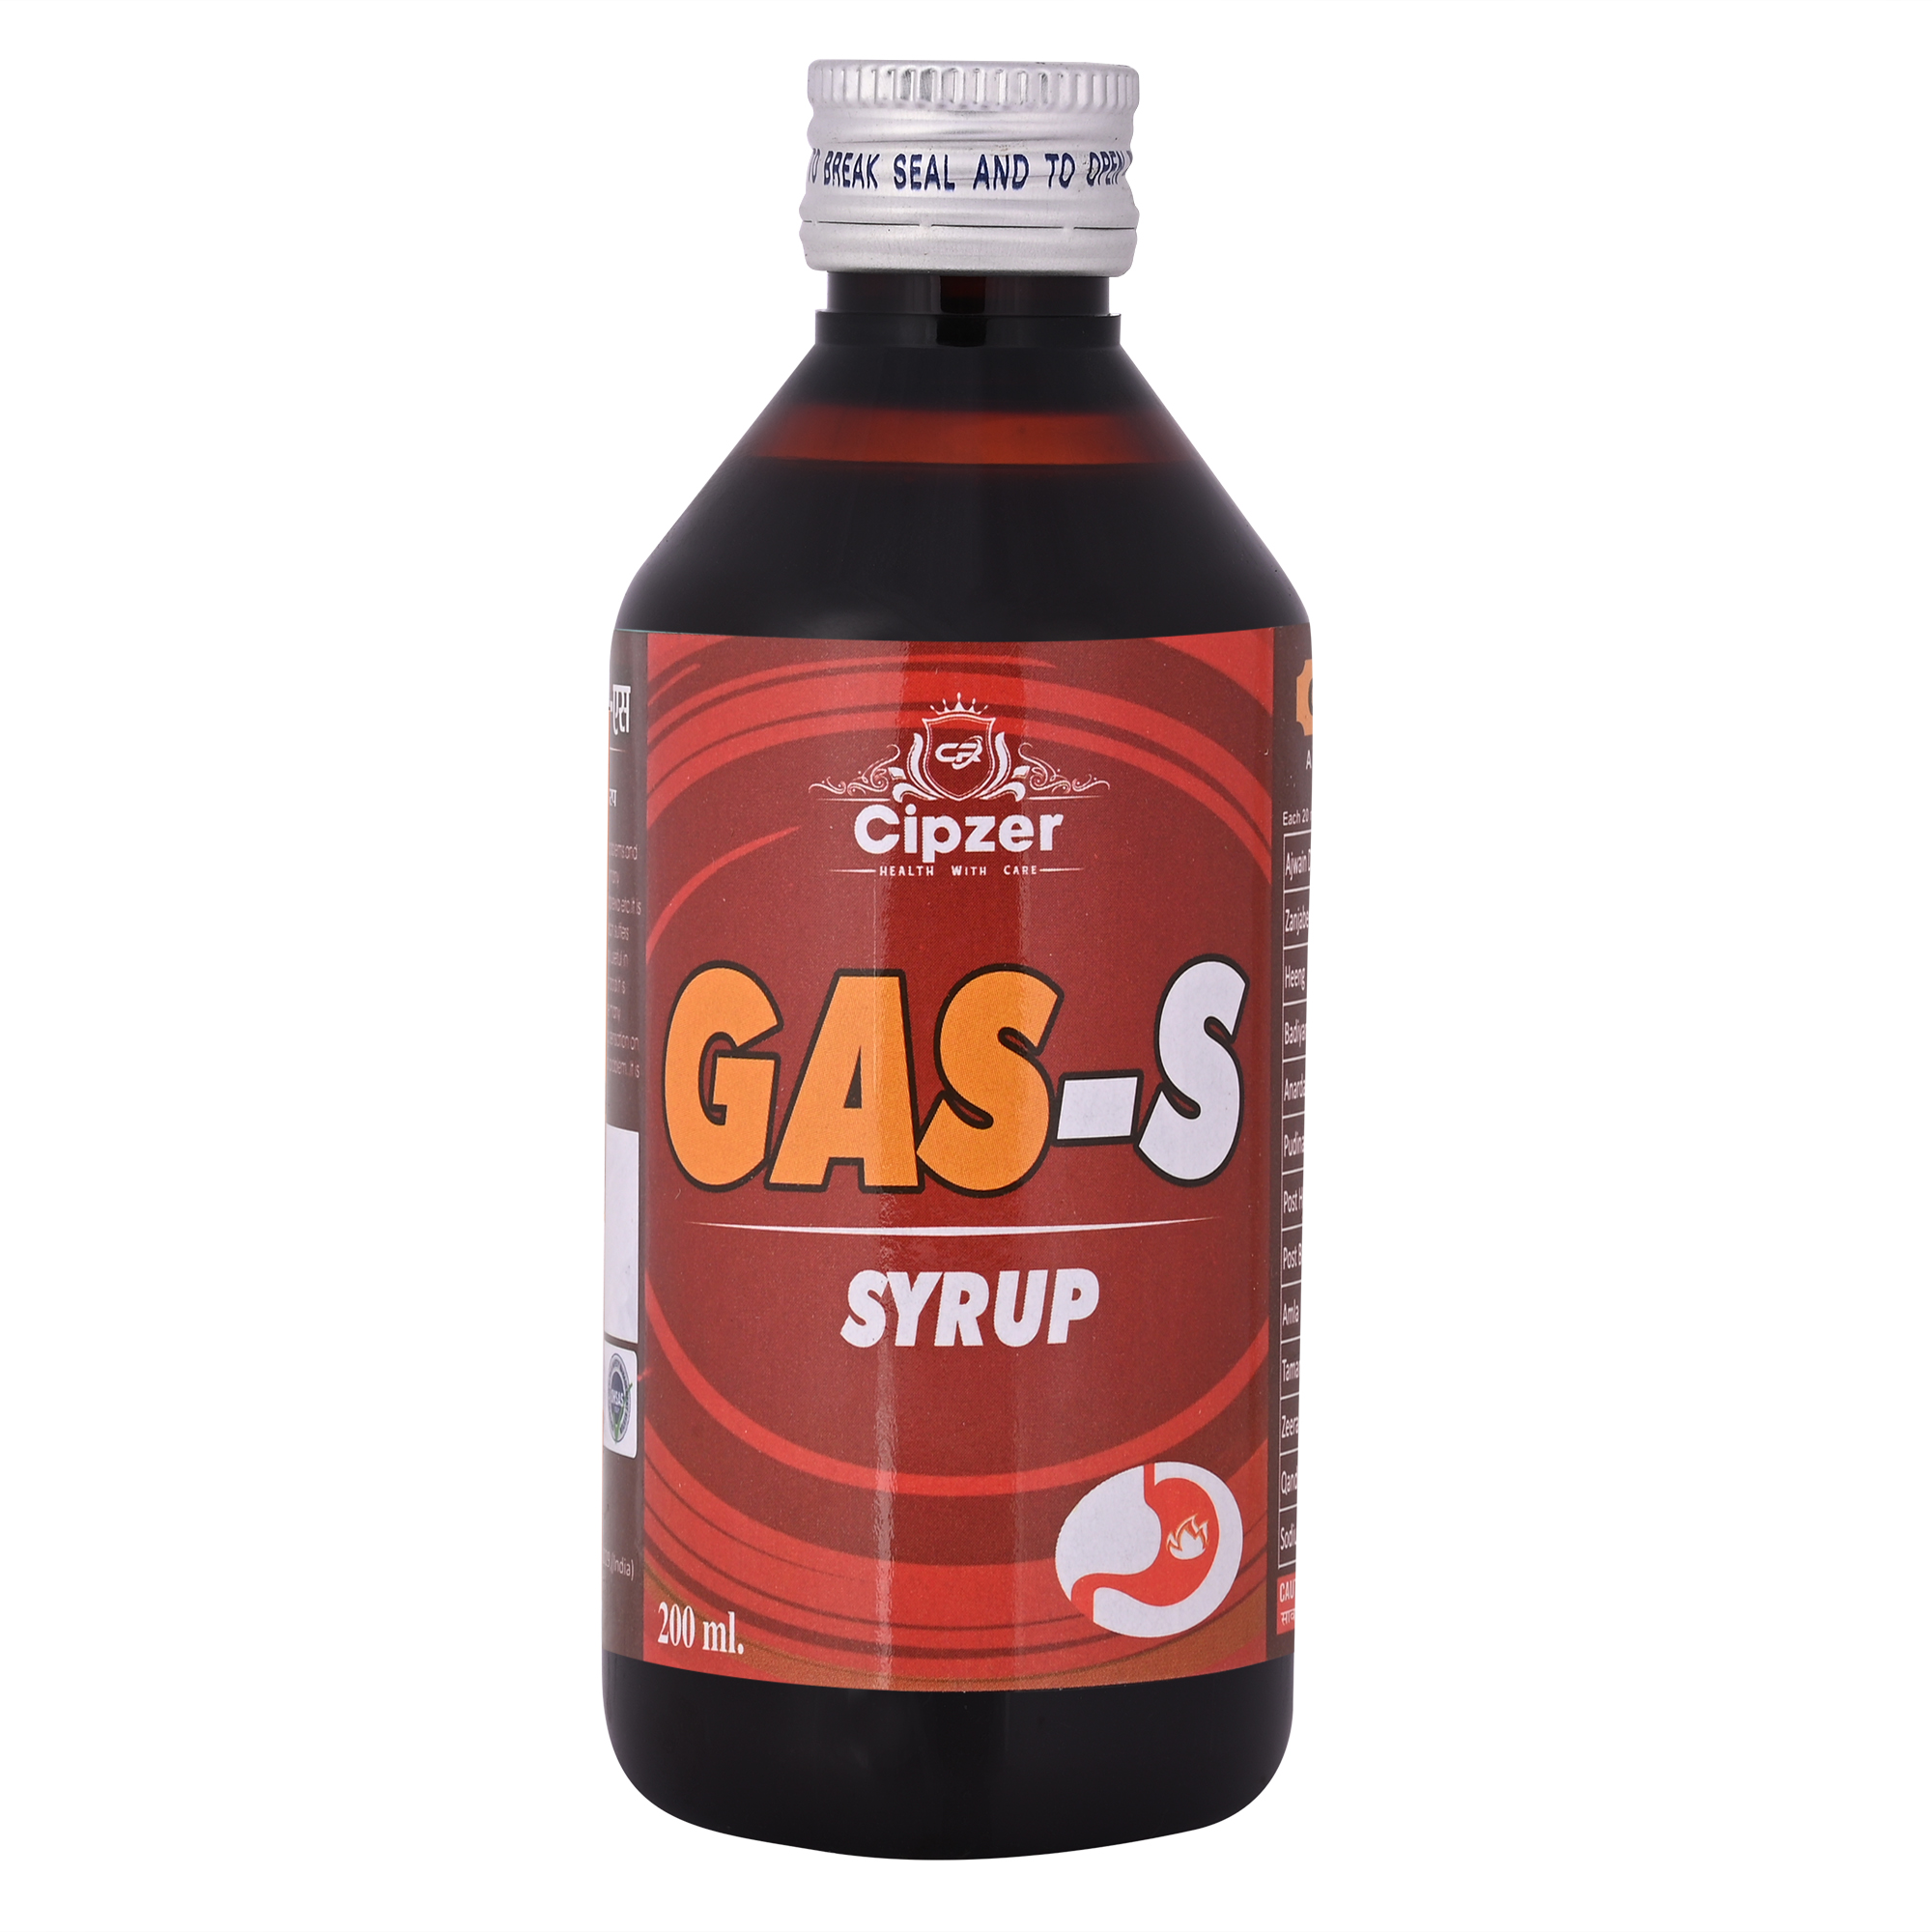 Cipzer Gas -S Syrup